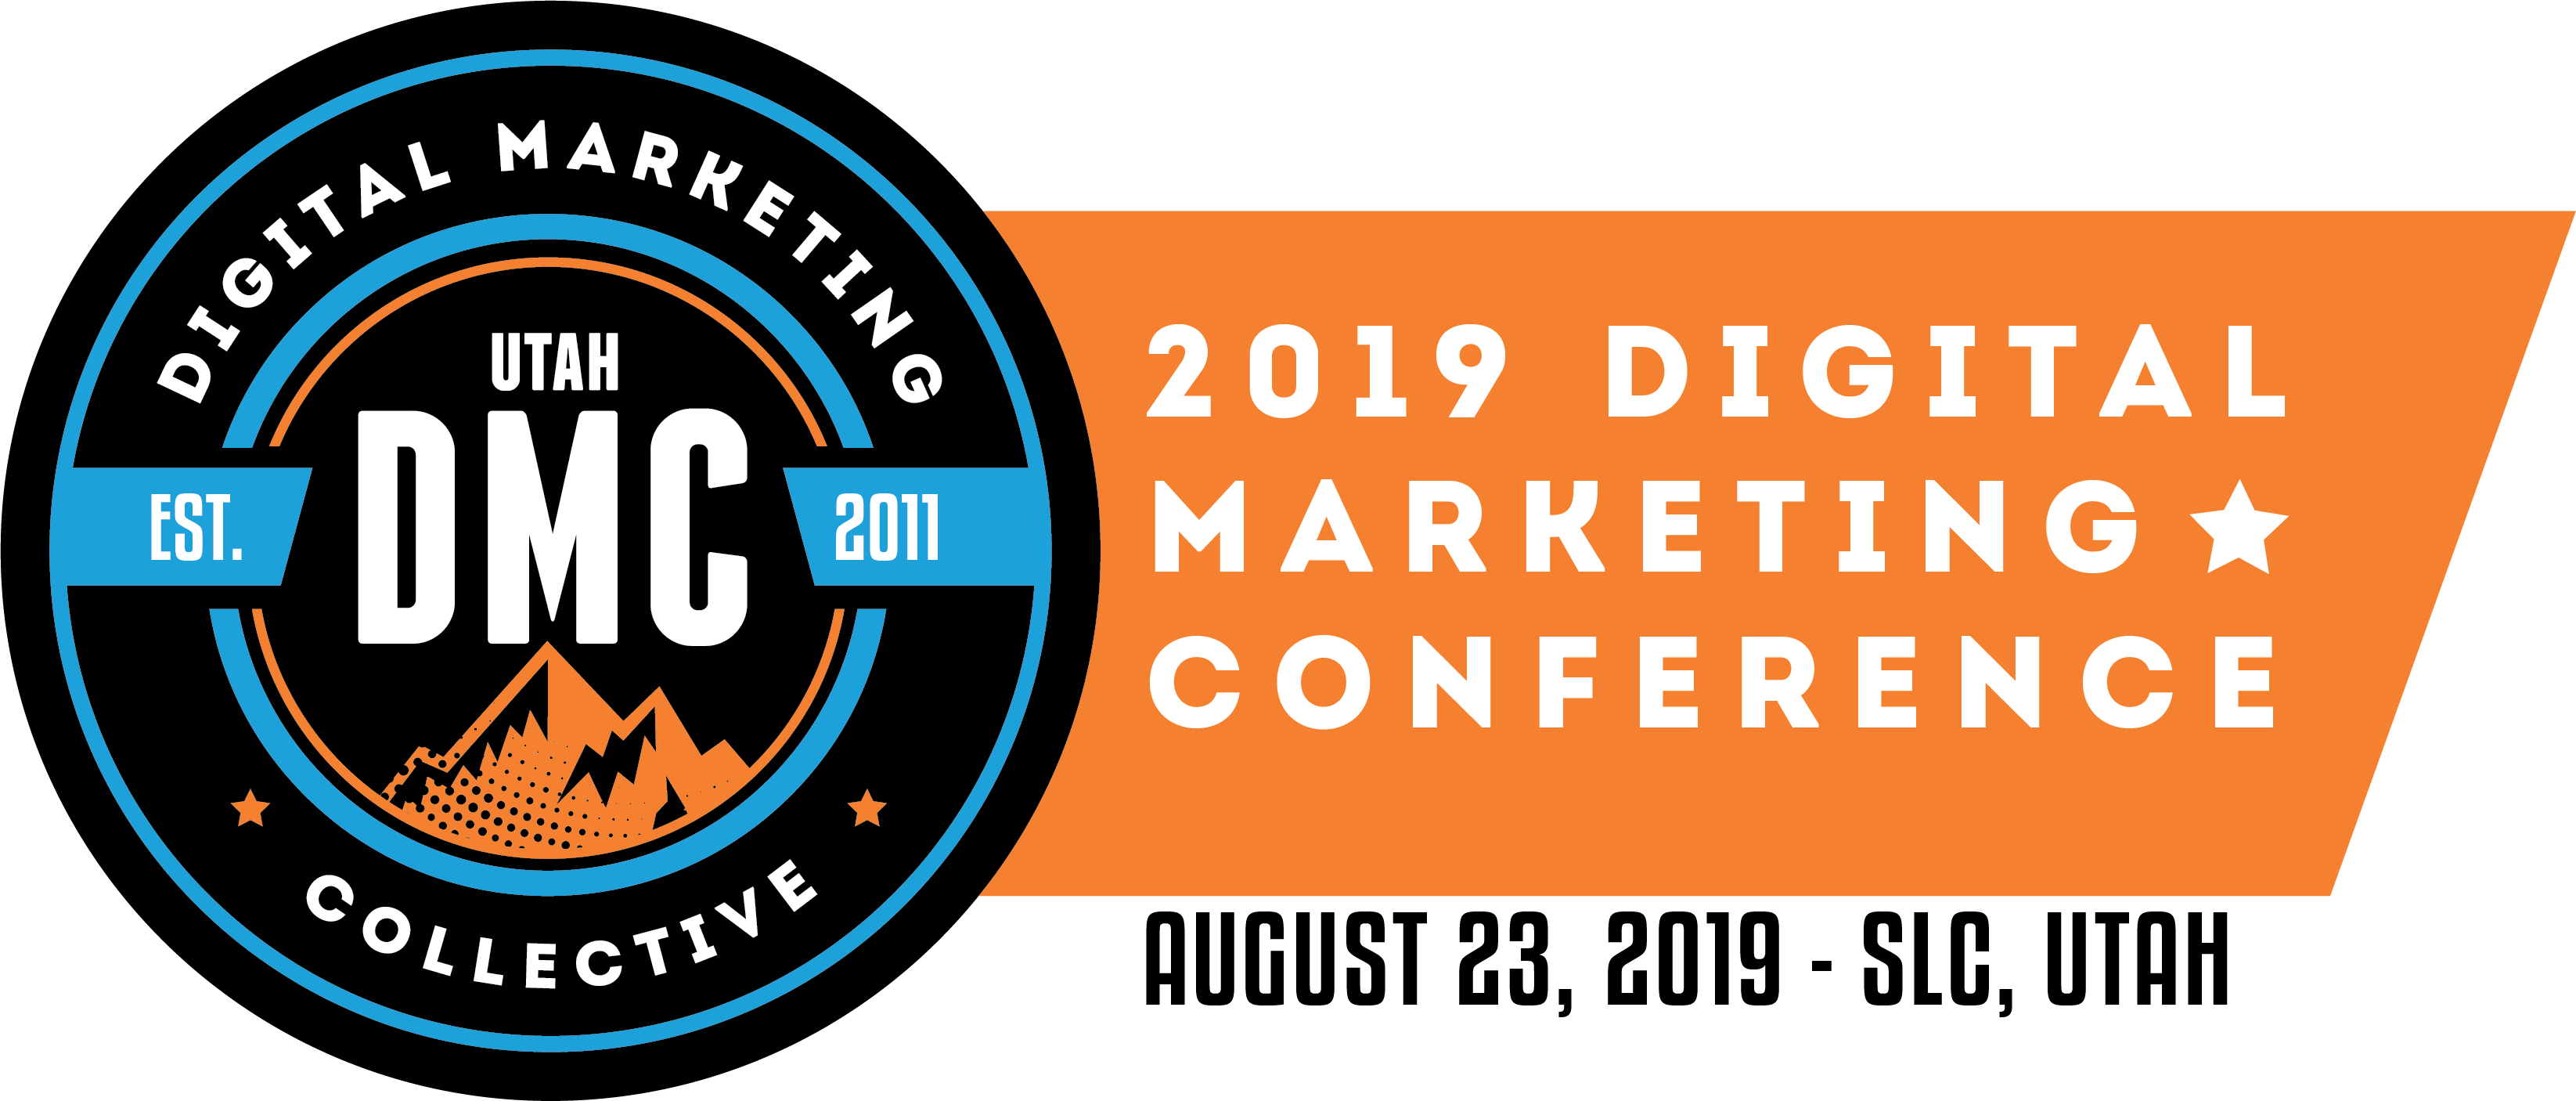 Utah DMC Conference 2019 Logo with Date